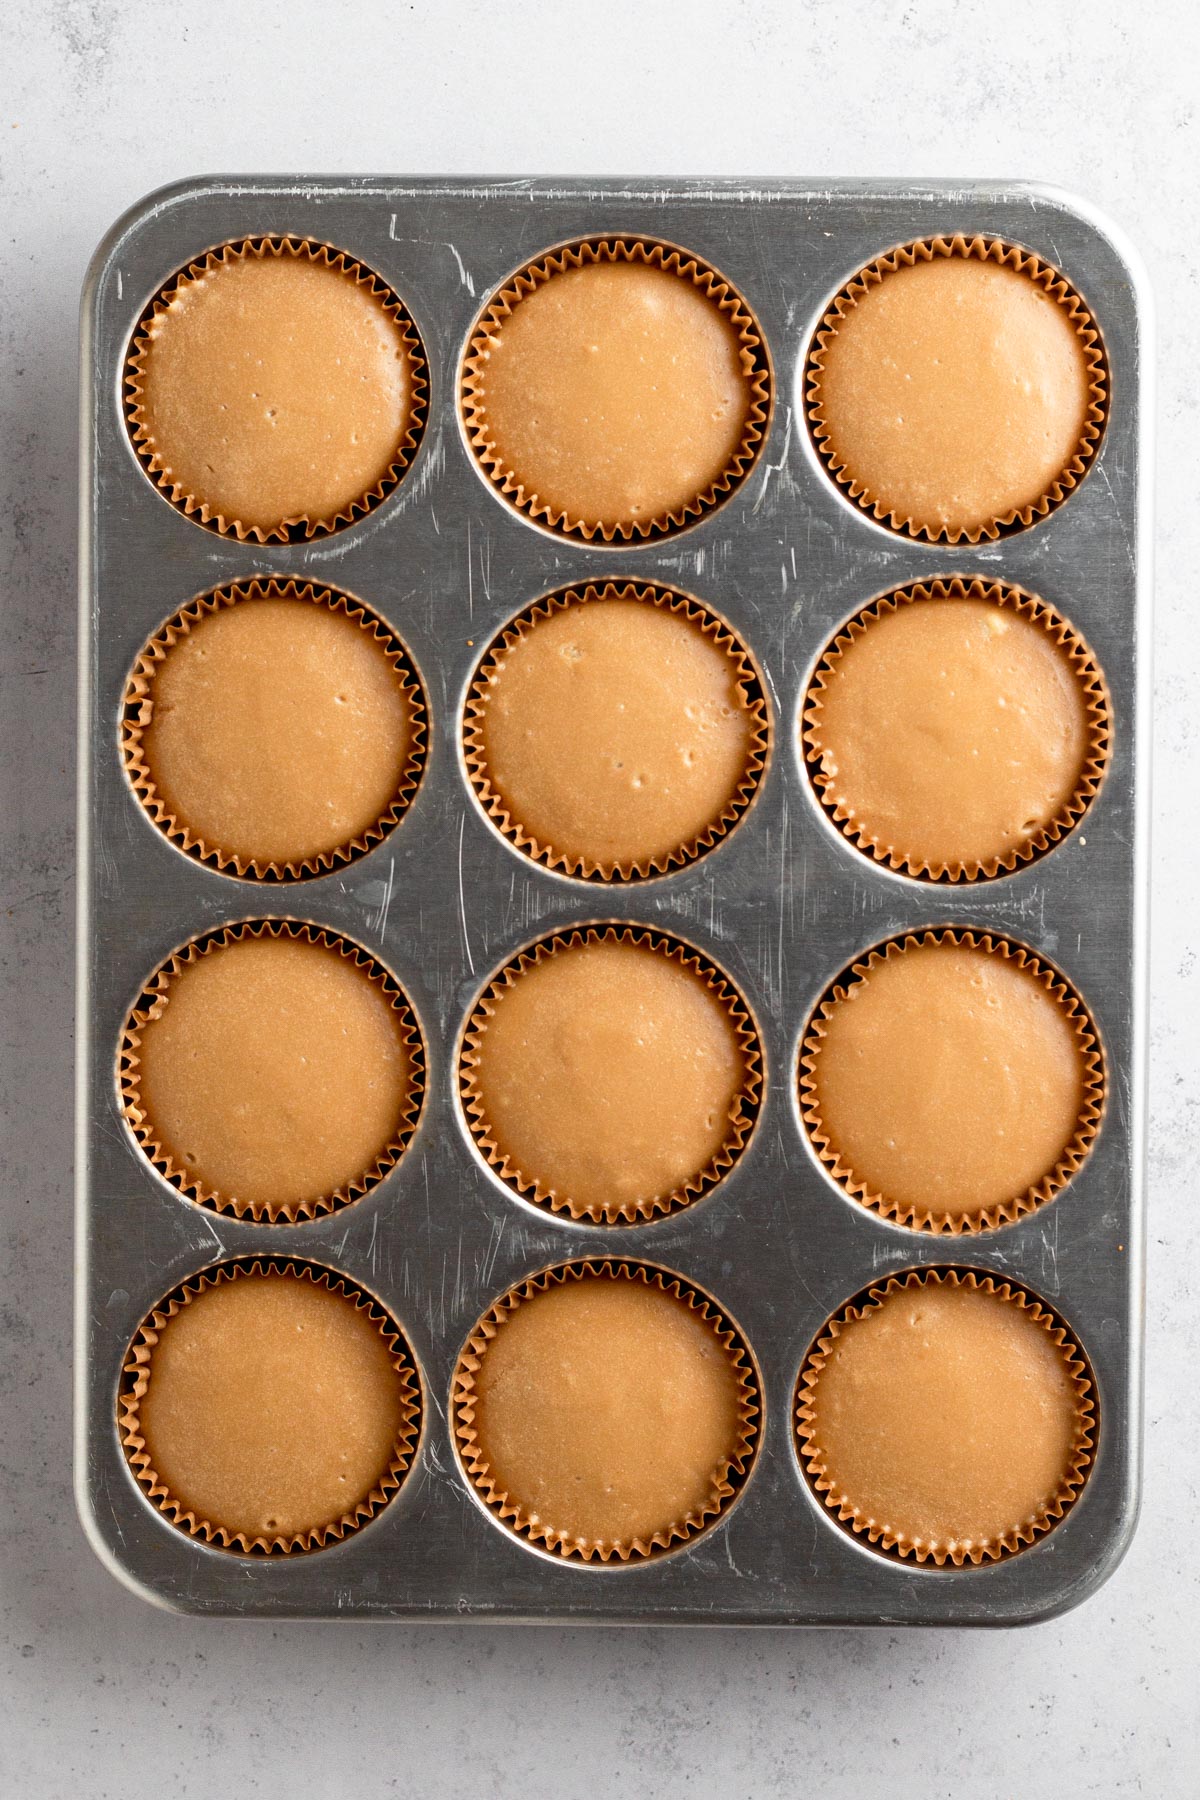 Baked mini cheesecakes in muffin pan.